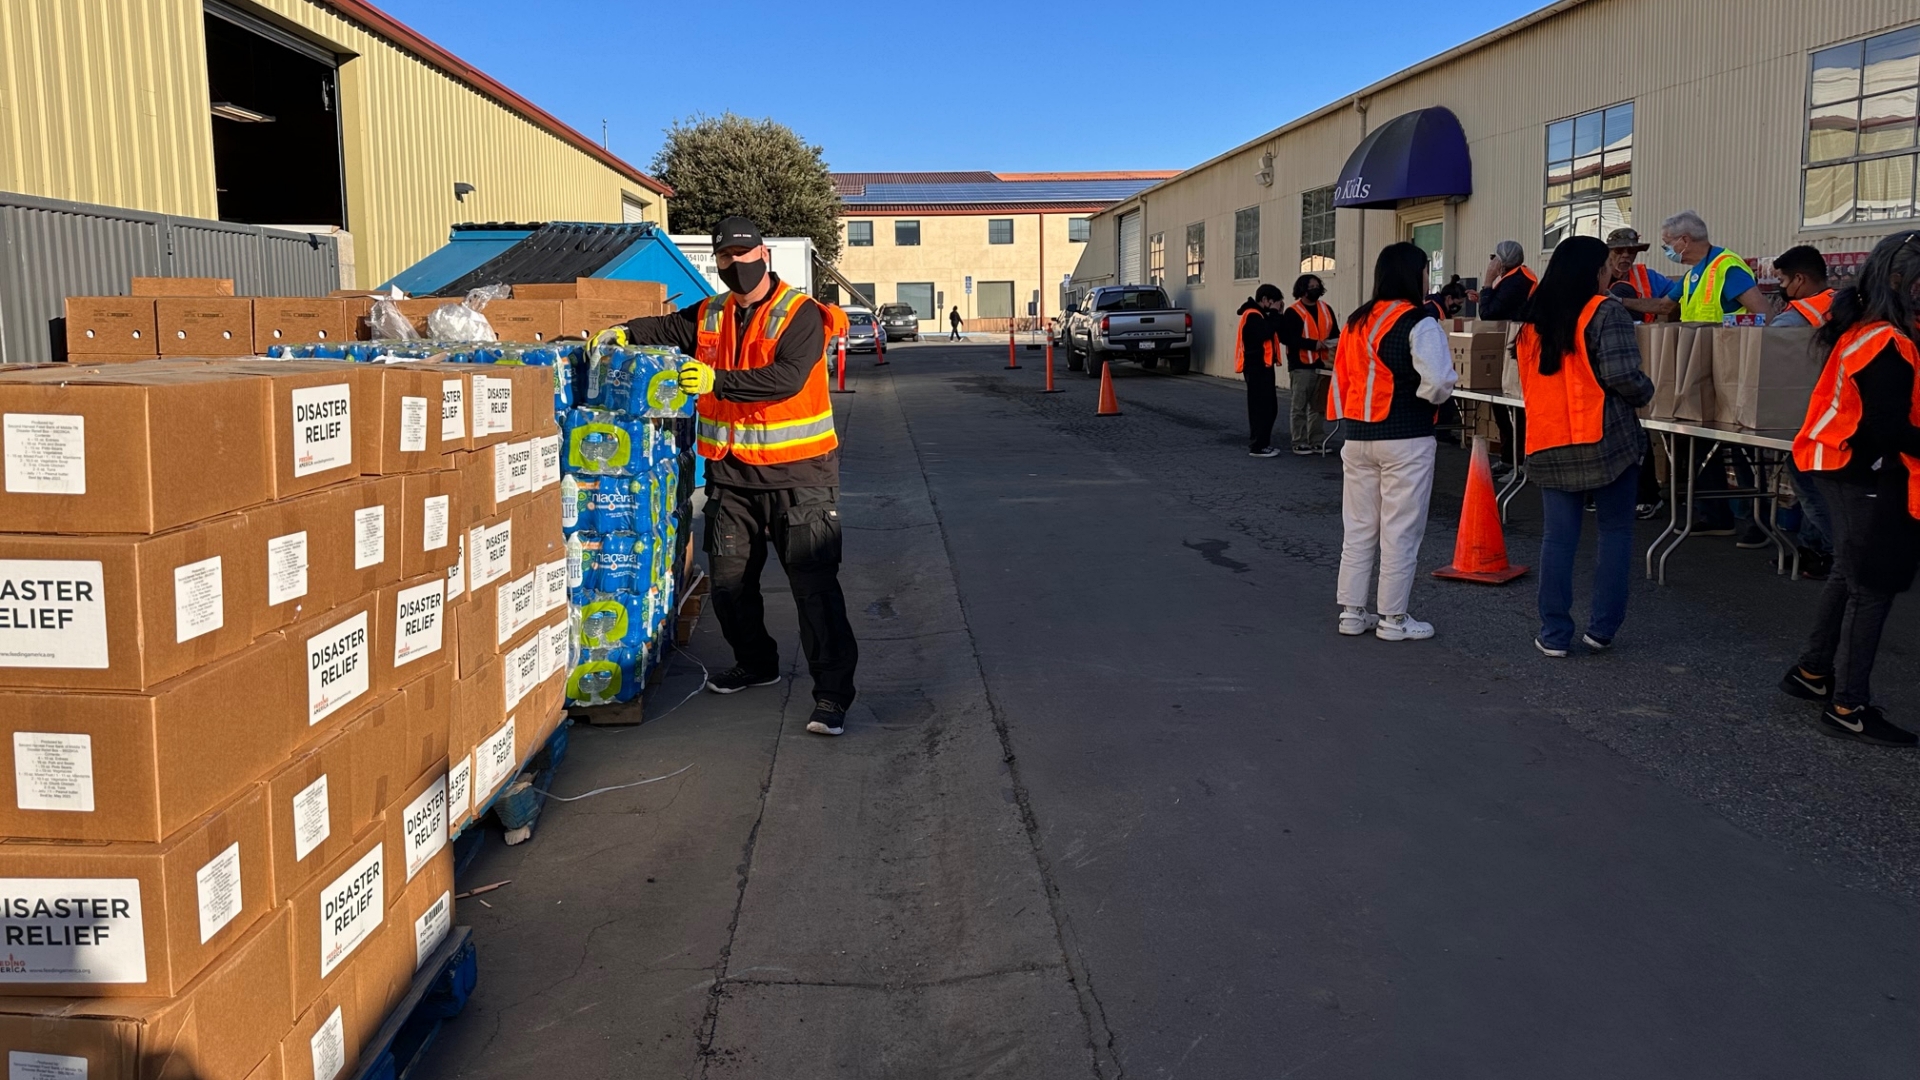 Volunteers help with drive-thru food distribtion at Community Food bank of San Benito County in Hollister, California.